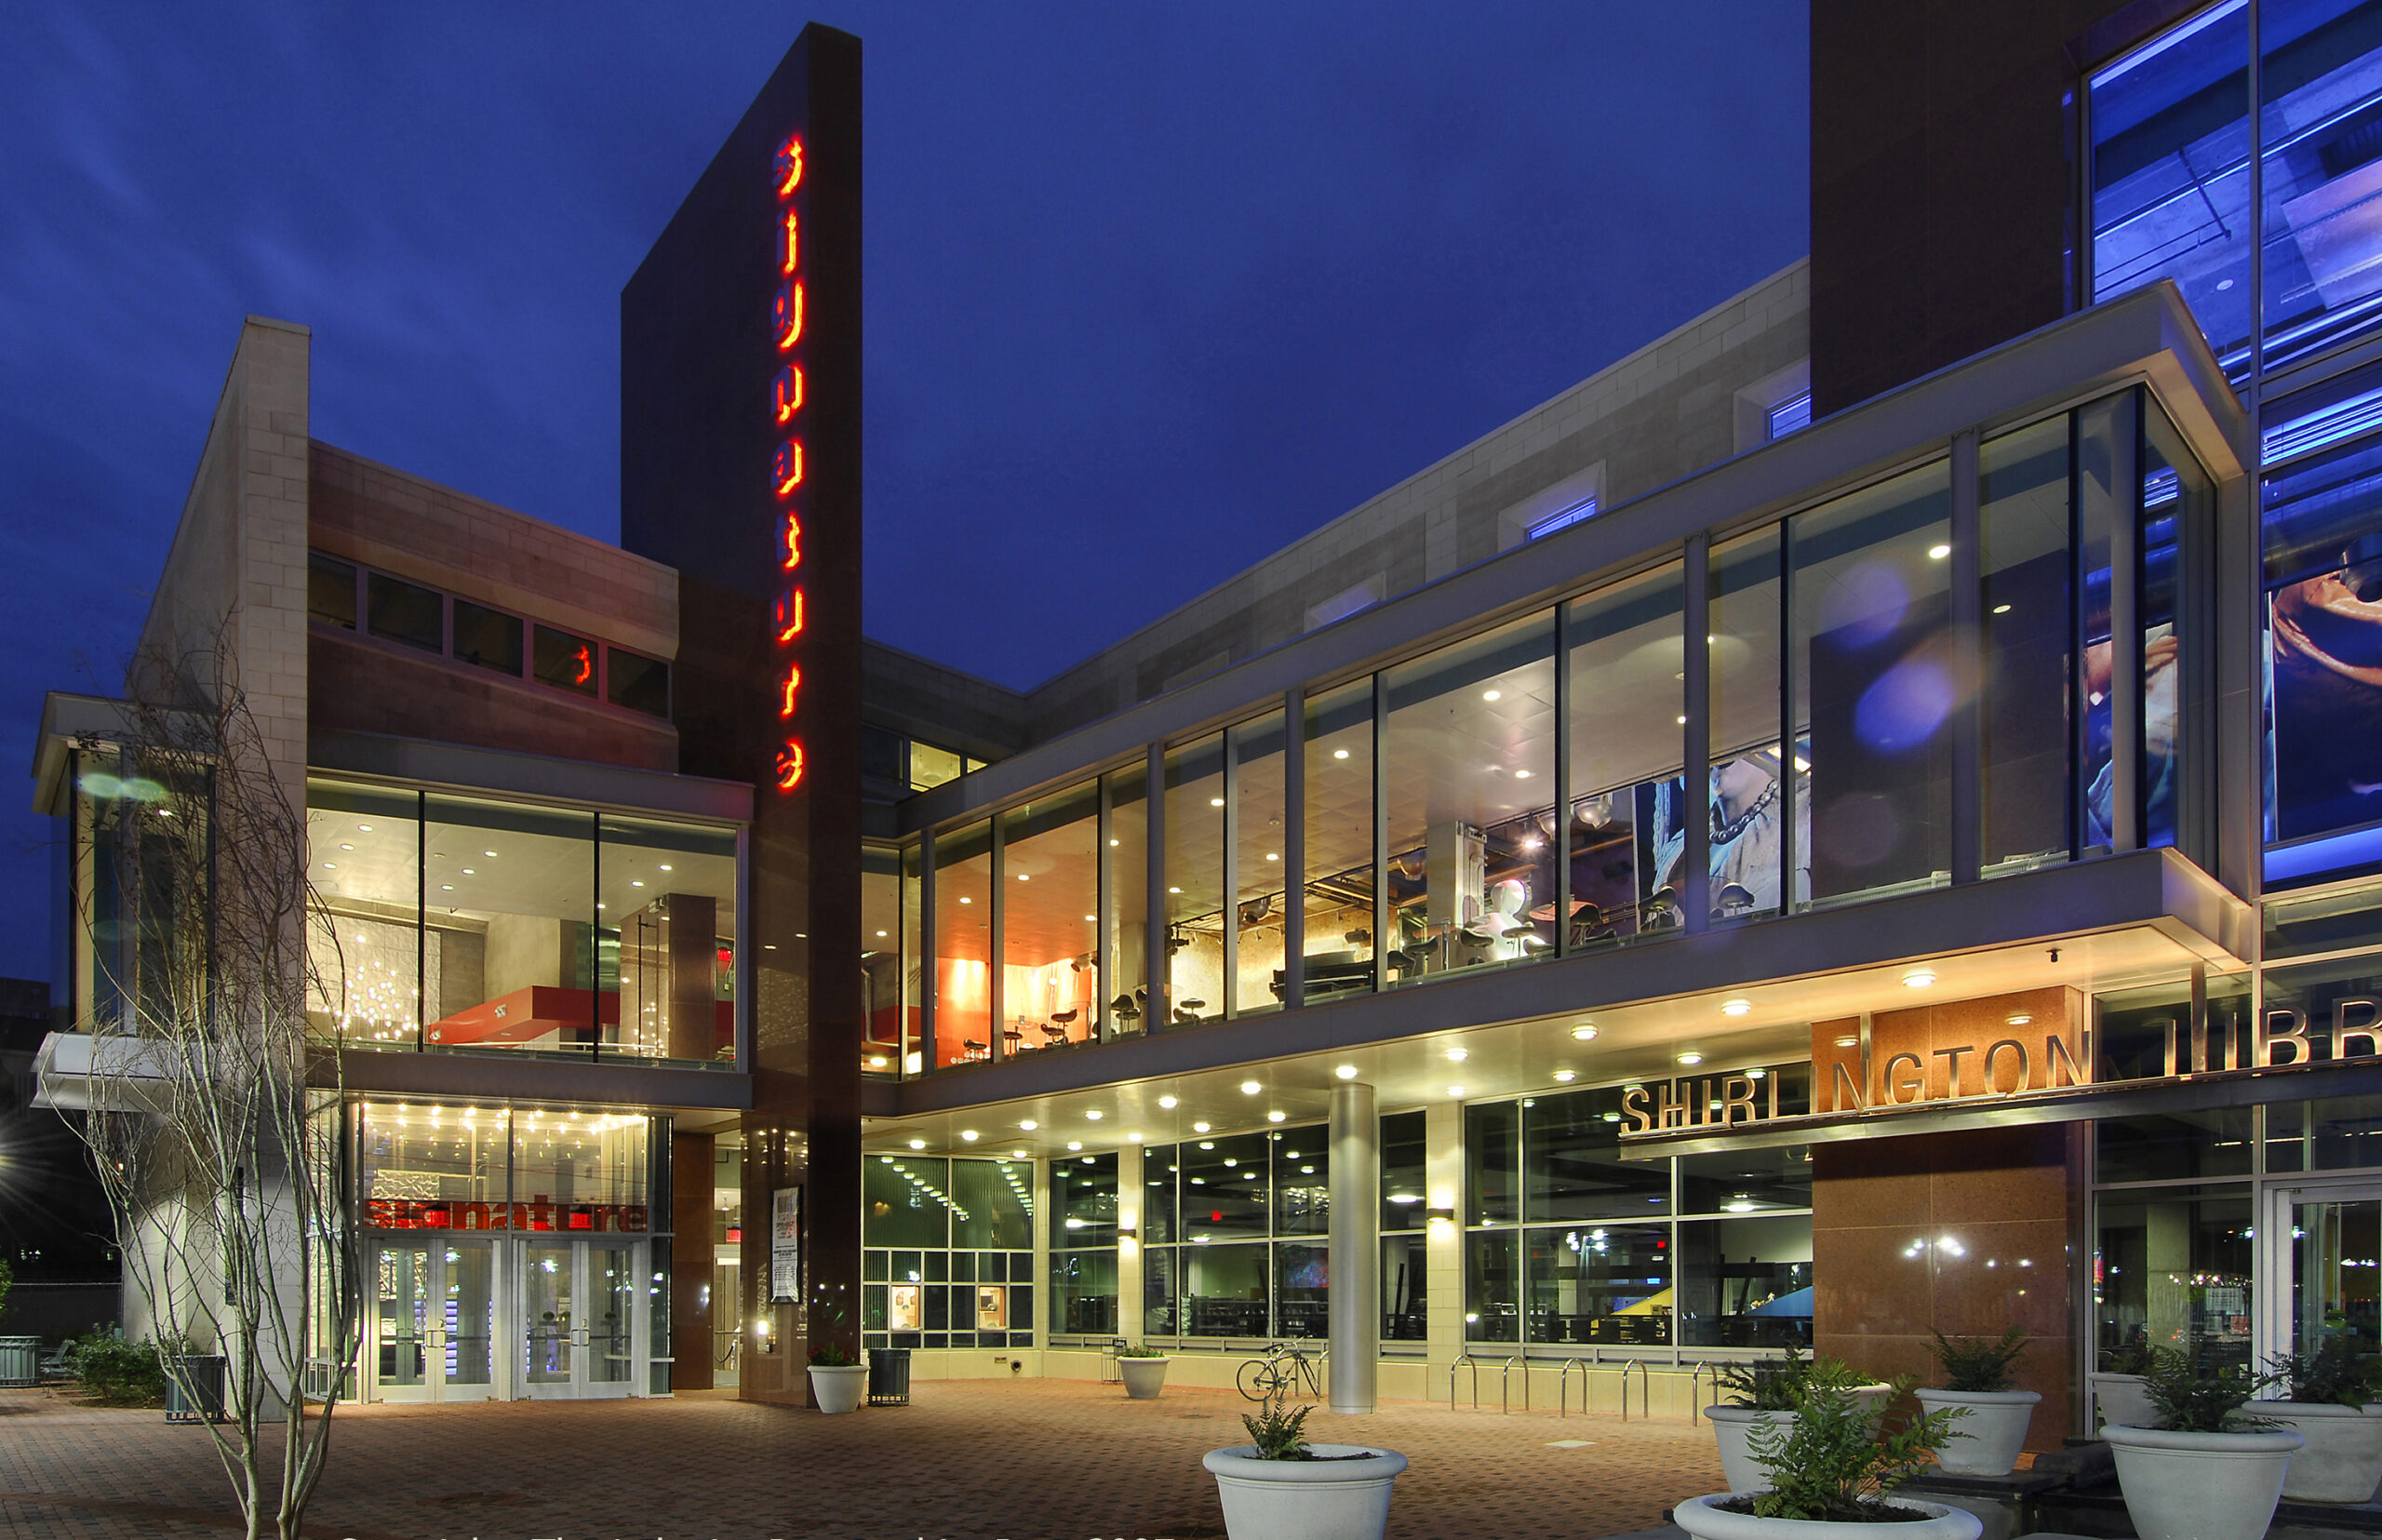 Shirlington Library and Signature Theater